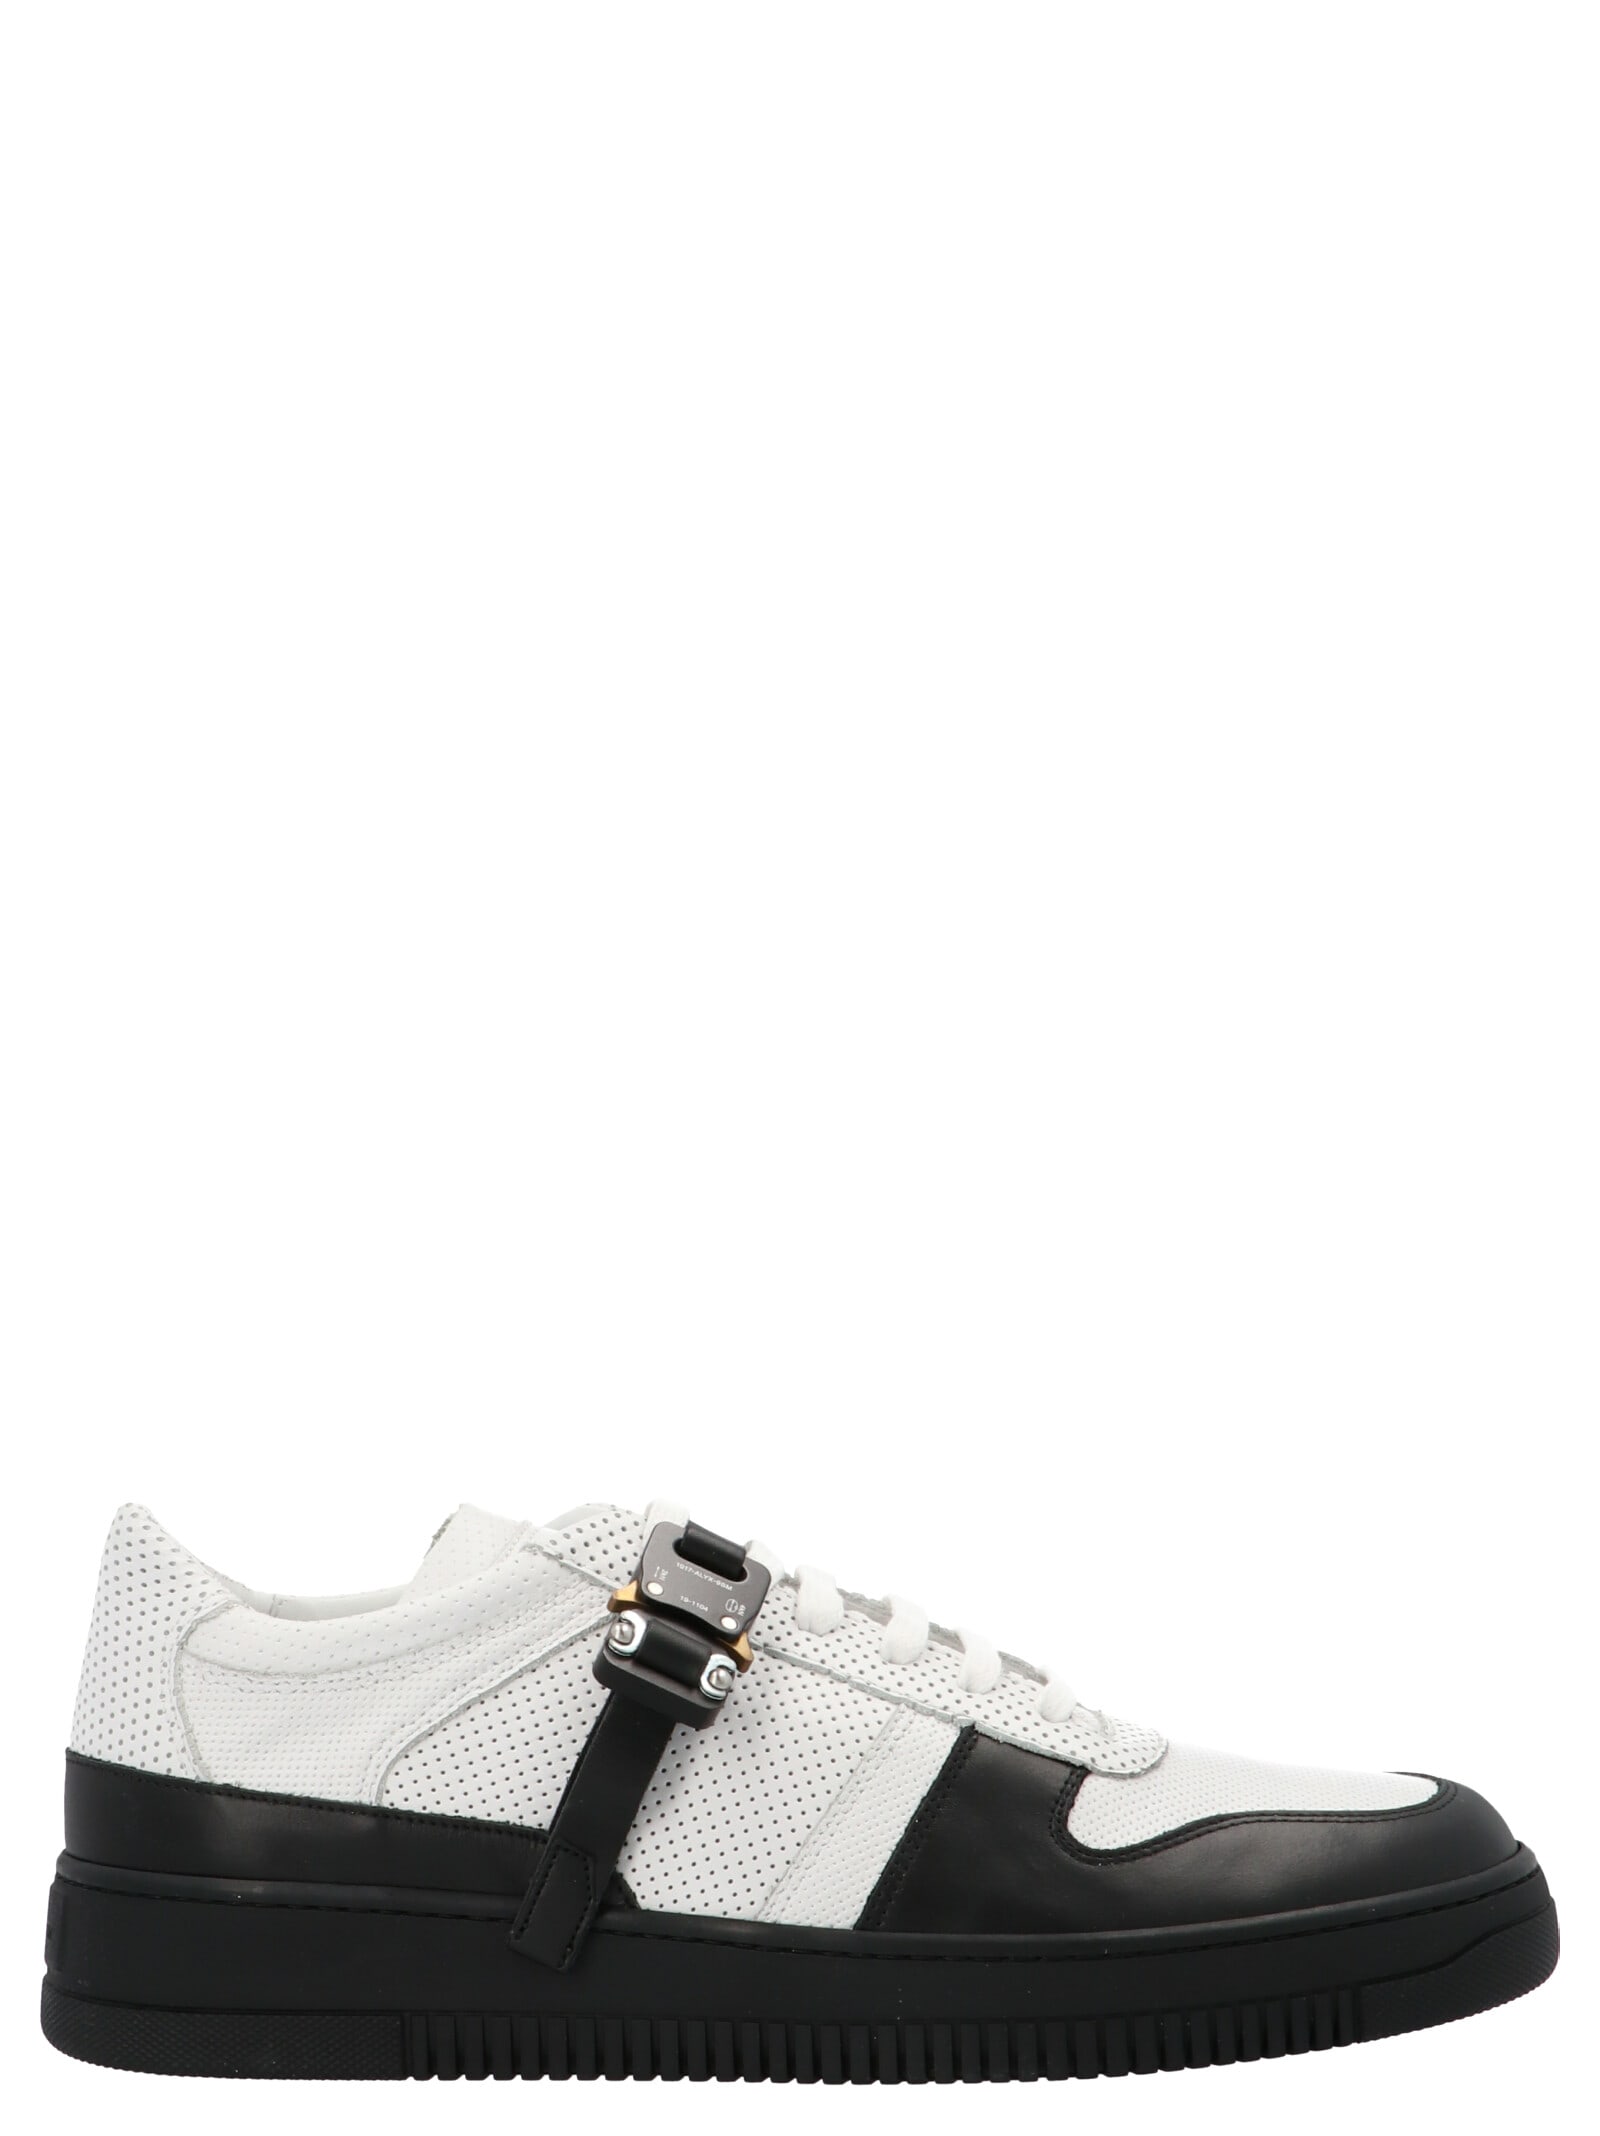 1017 Alyx 9sm buckle Trainer Shoes